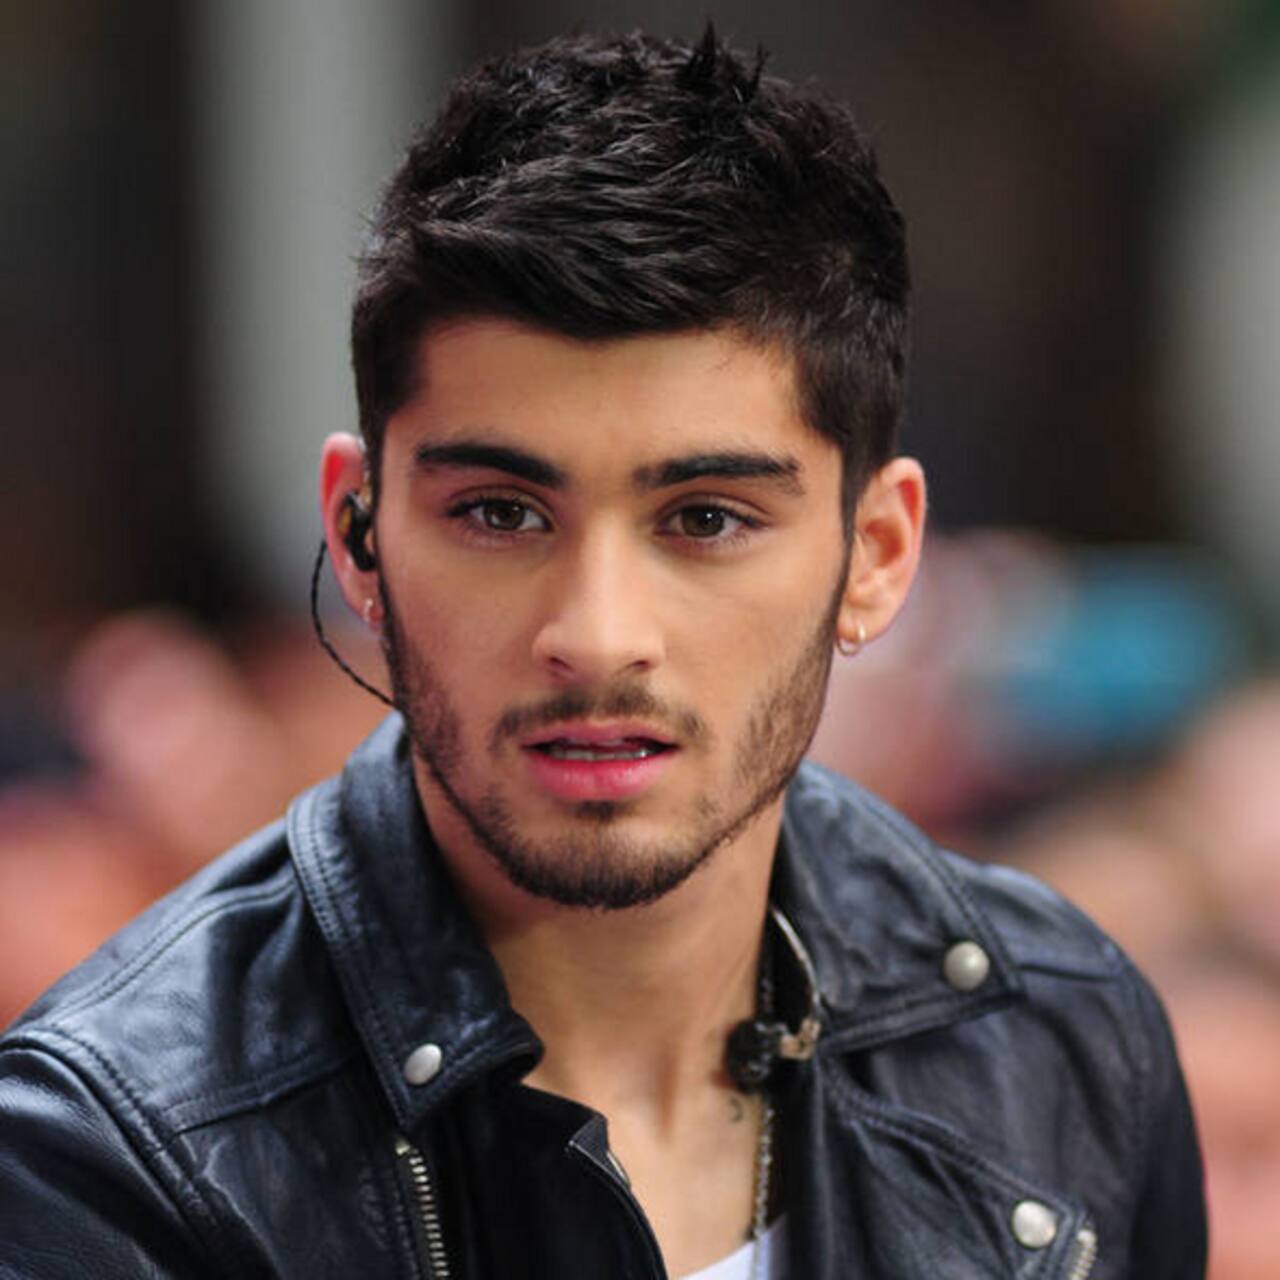 Fans Distraught As Zayn Malik Quits One Direction Bollywood News And Gossip Movie Reviews